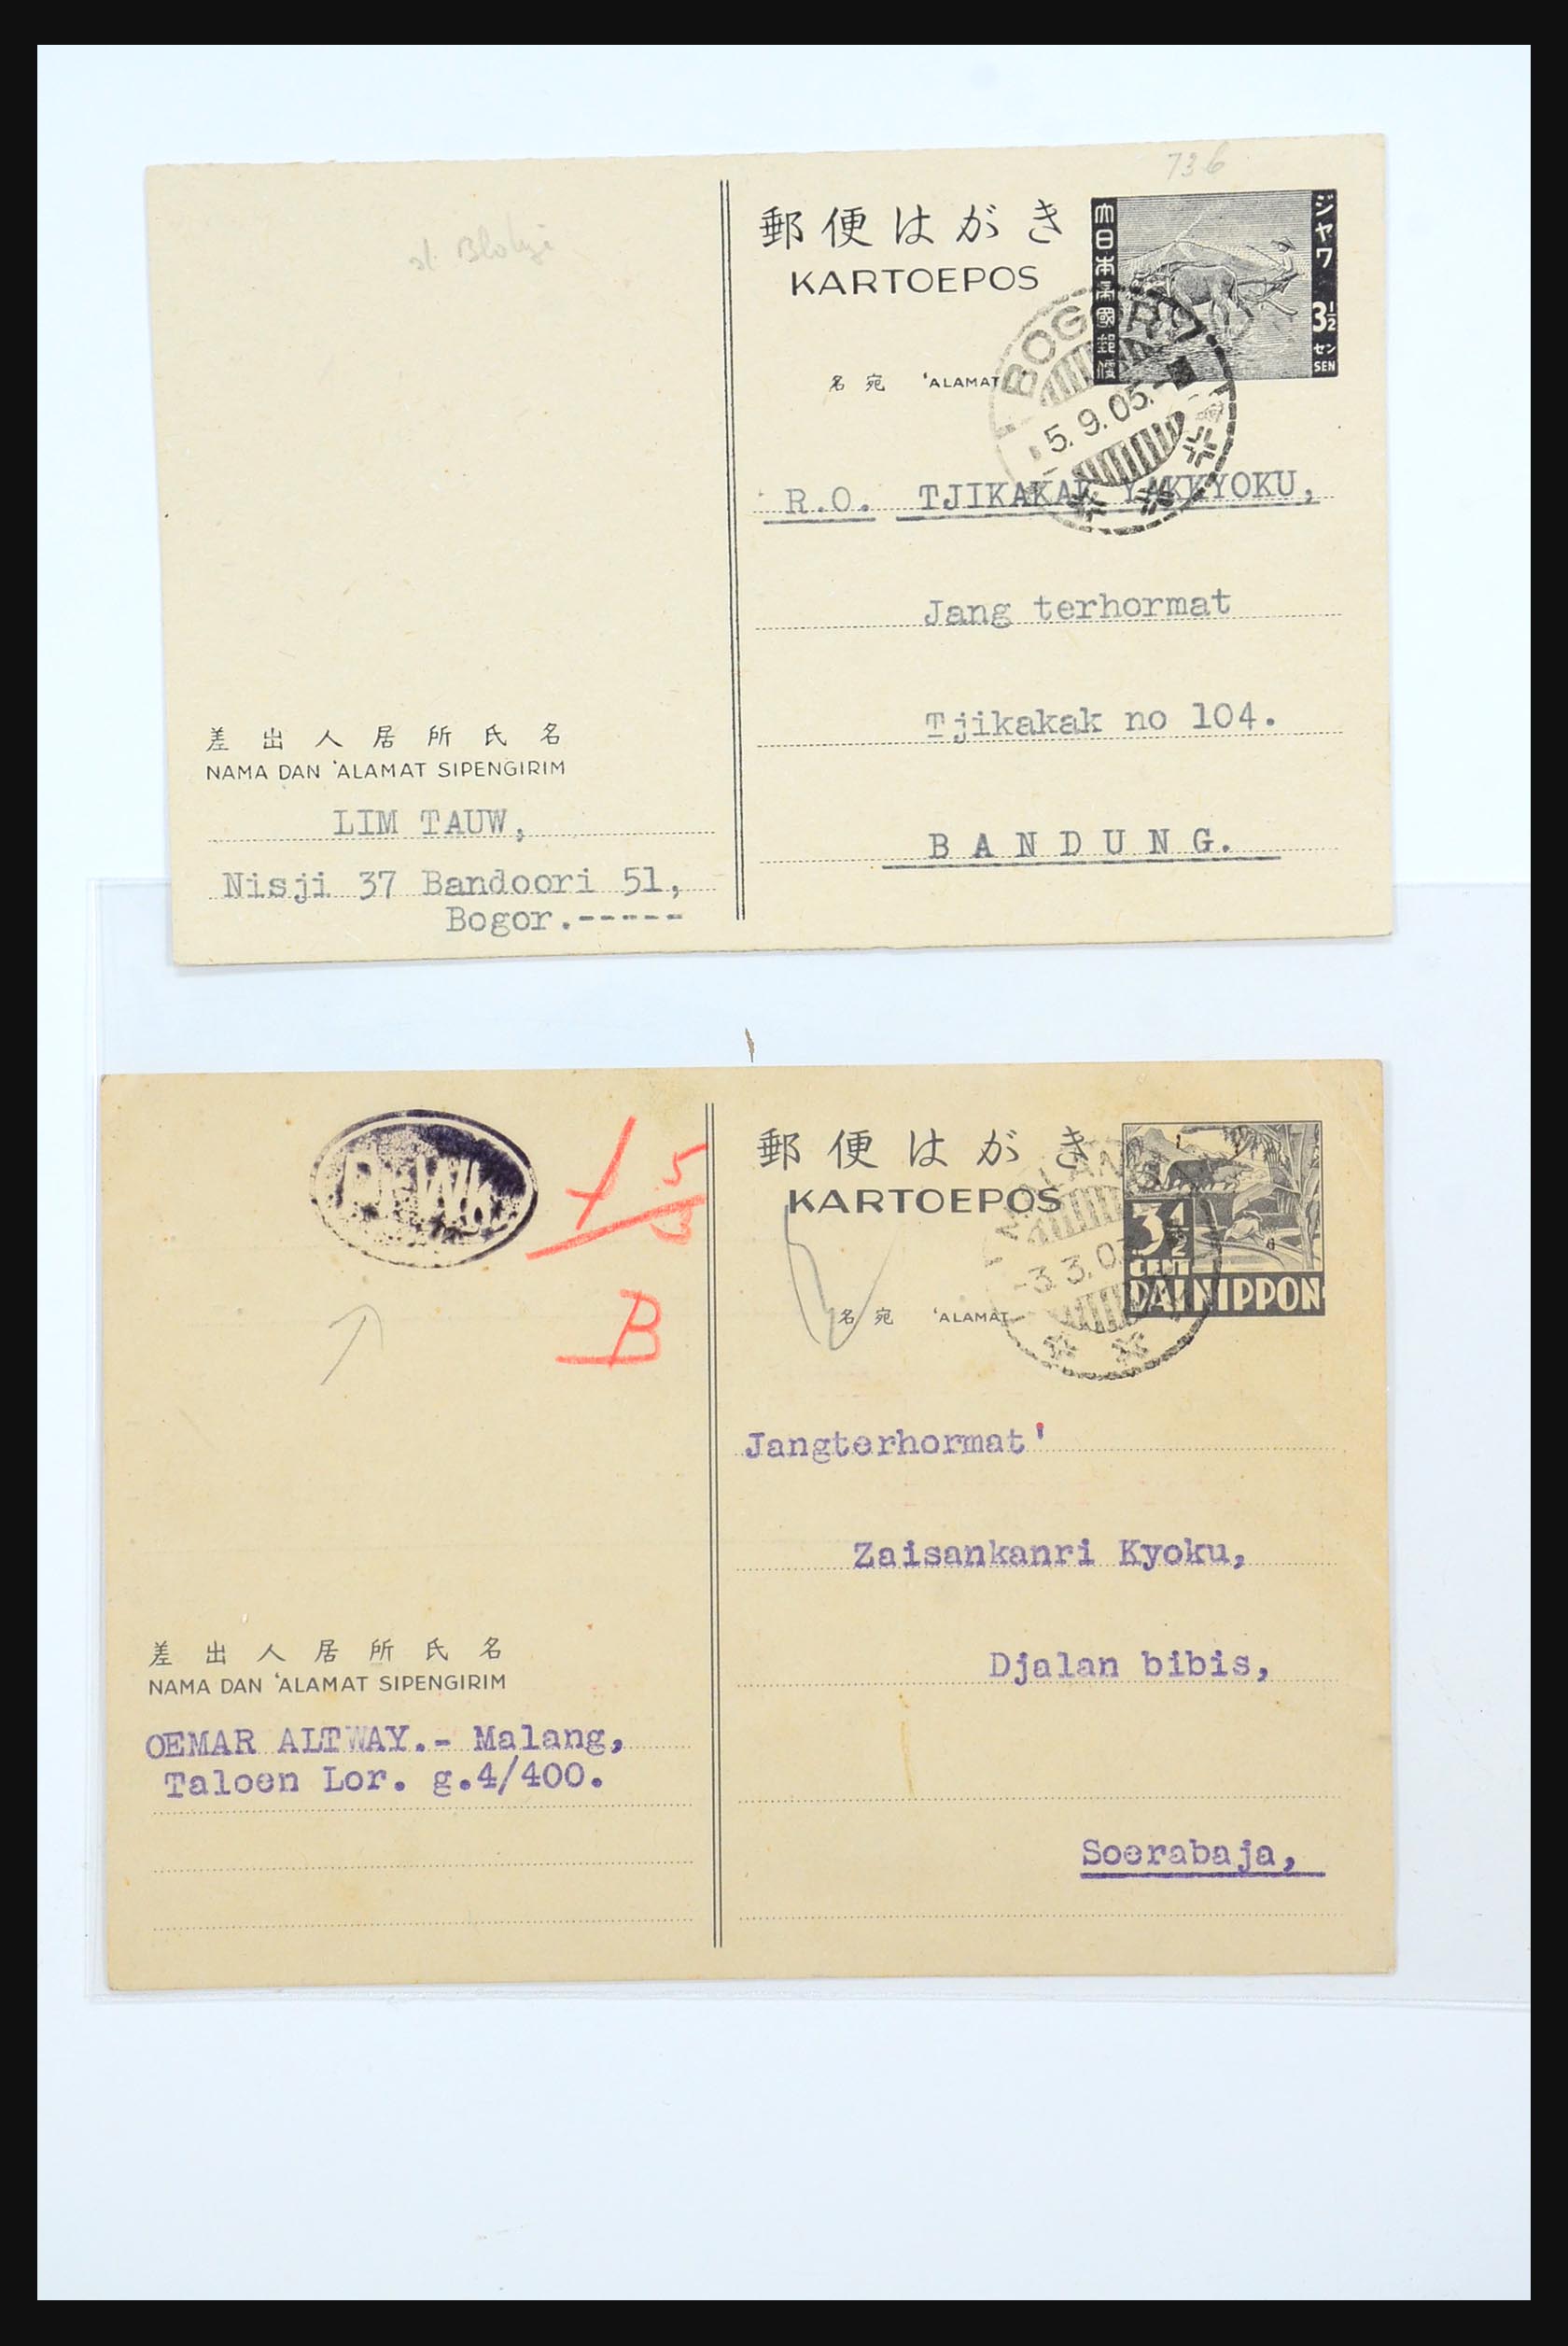 31362 049 - 31362 Netherlands Indies Japanese occupation covers 1942-1945.